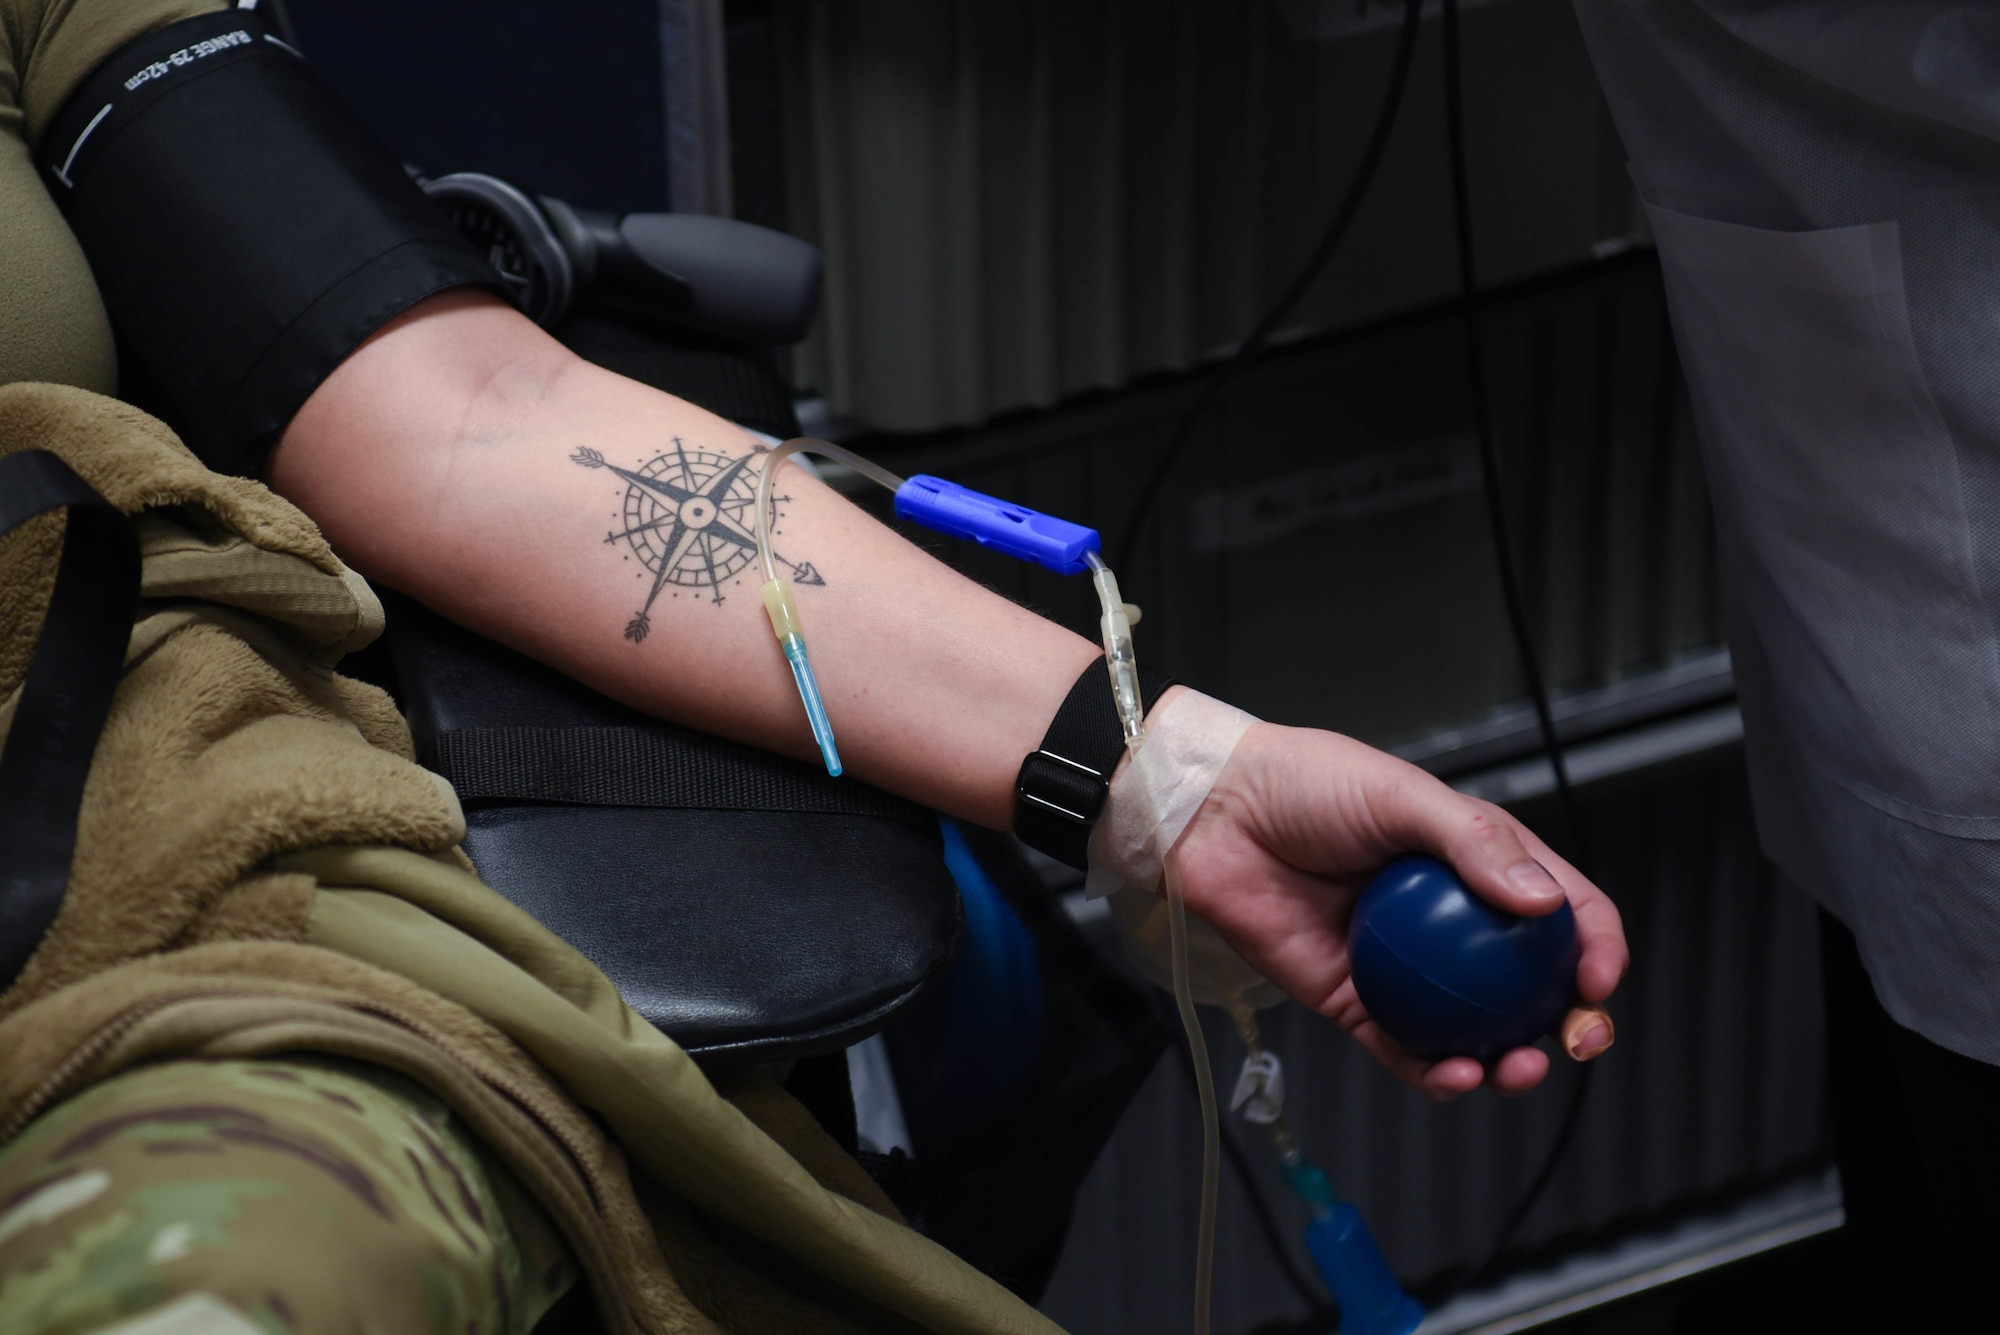 U.S. Air National Guard Member Tech. Sgt. Samantha McKinney squeezes a ball while having her blood drawn by the 88th Medical Group for a base wide blood drive on April 5, 2024 in Springfield, Ohio. The 178th Wing participates in The Armed Services Blood Program which provides quality blood products for service members, veterans and their families in both peace and war. (U.S. Air National Guard photo by Airman 1st Class Josh Kaeser)